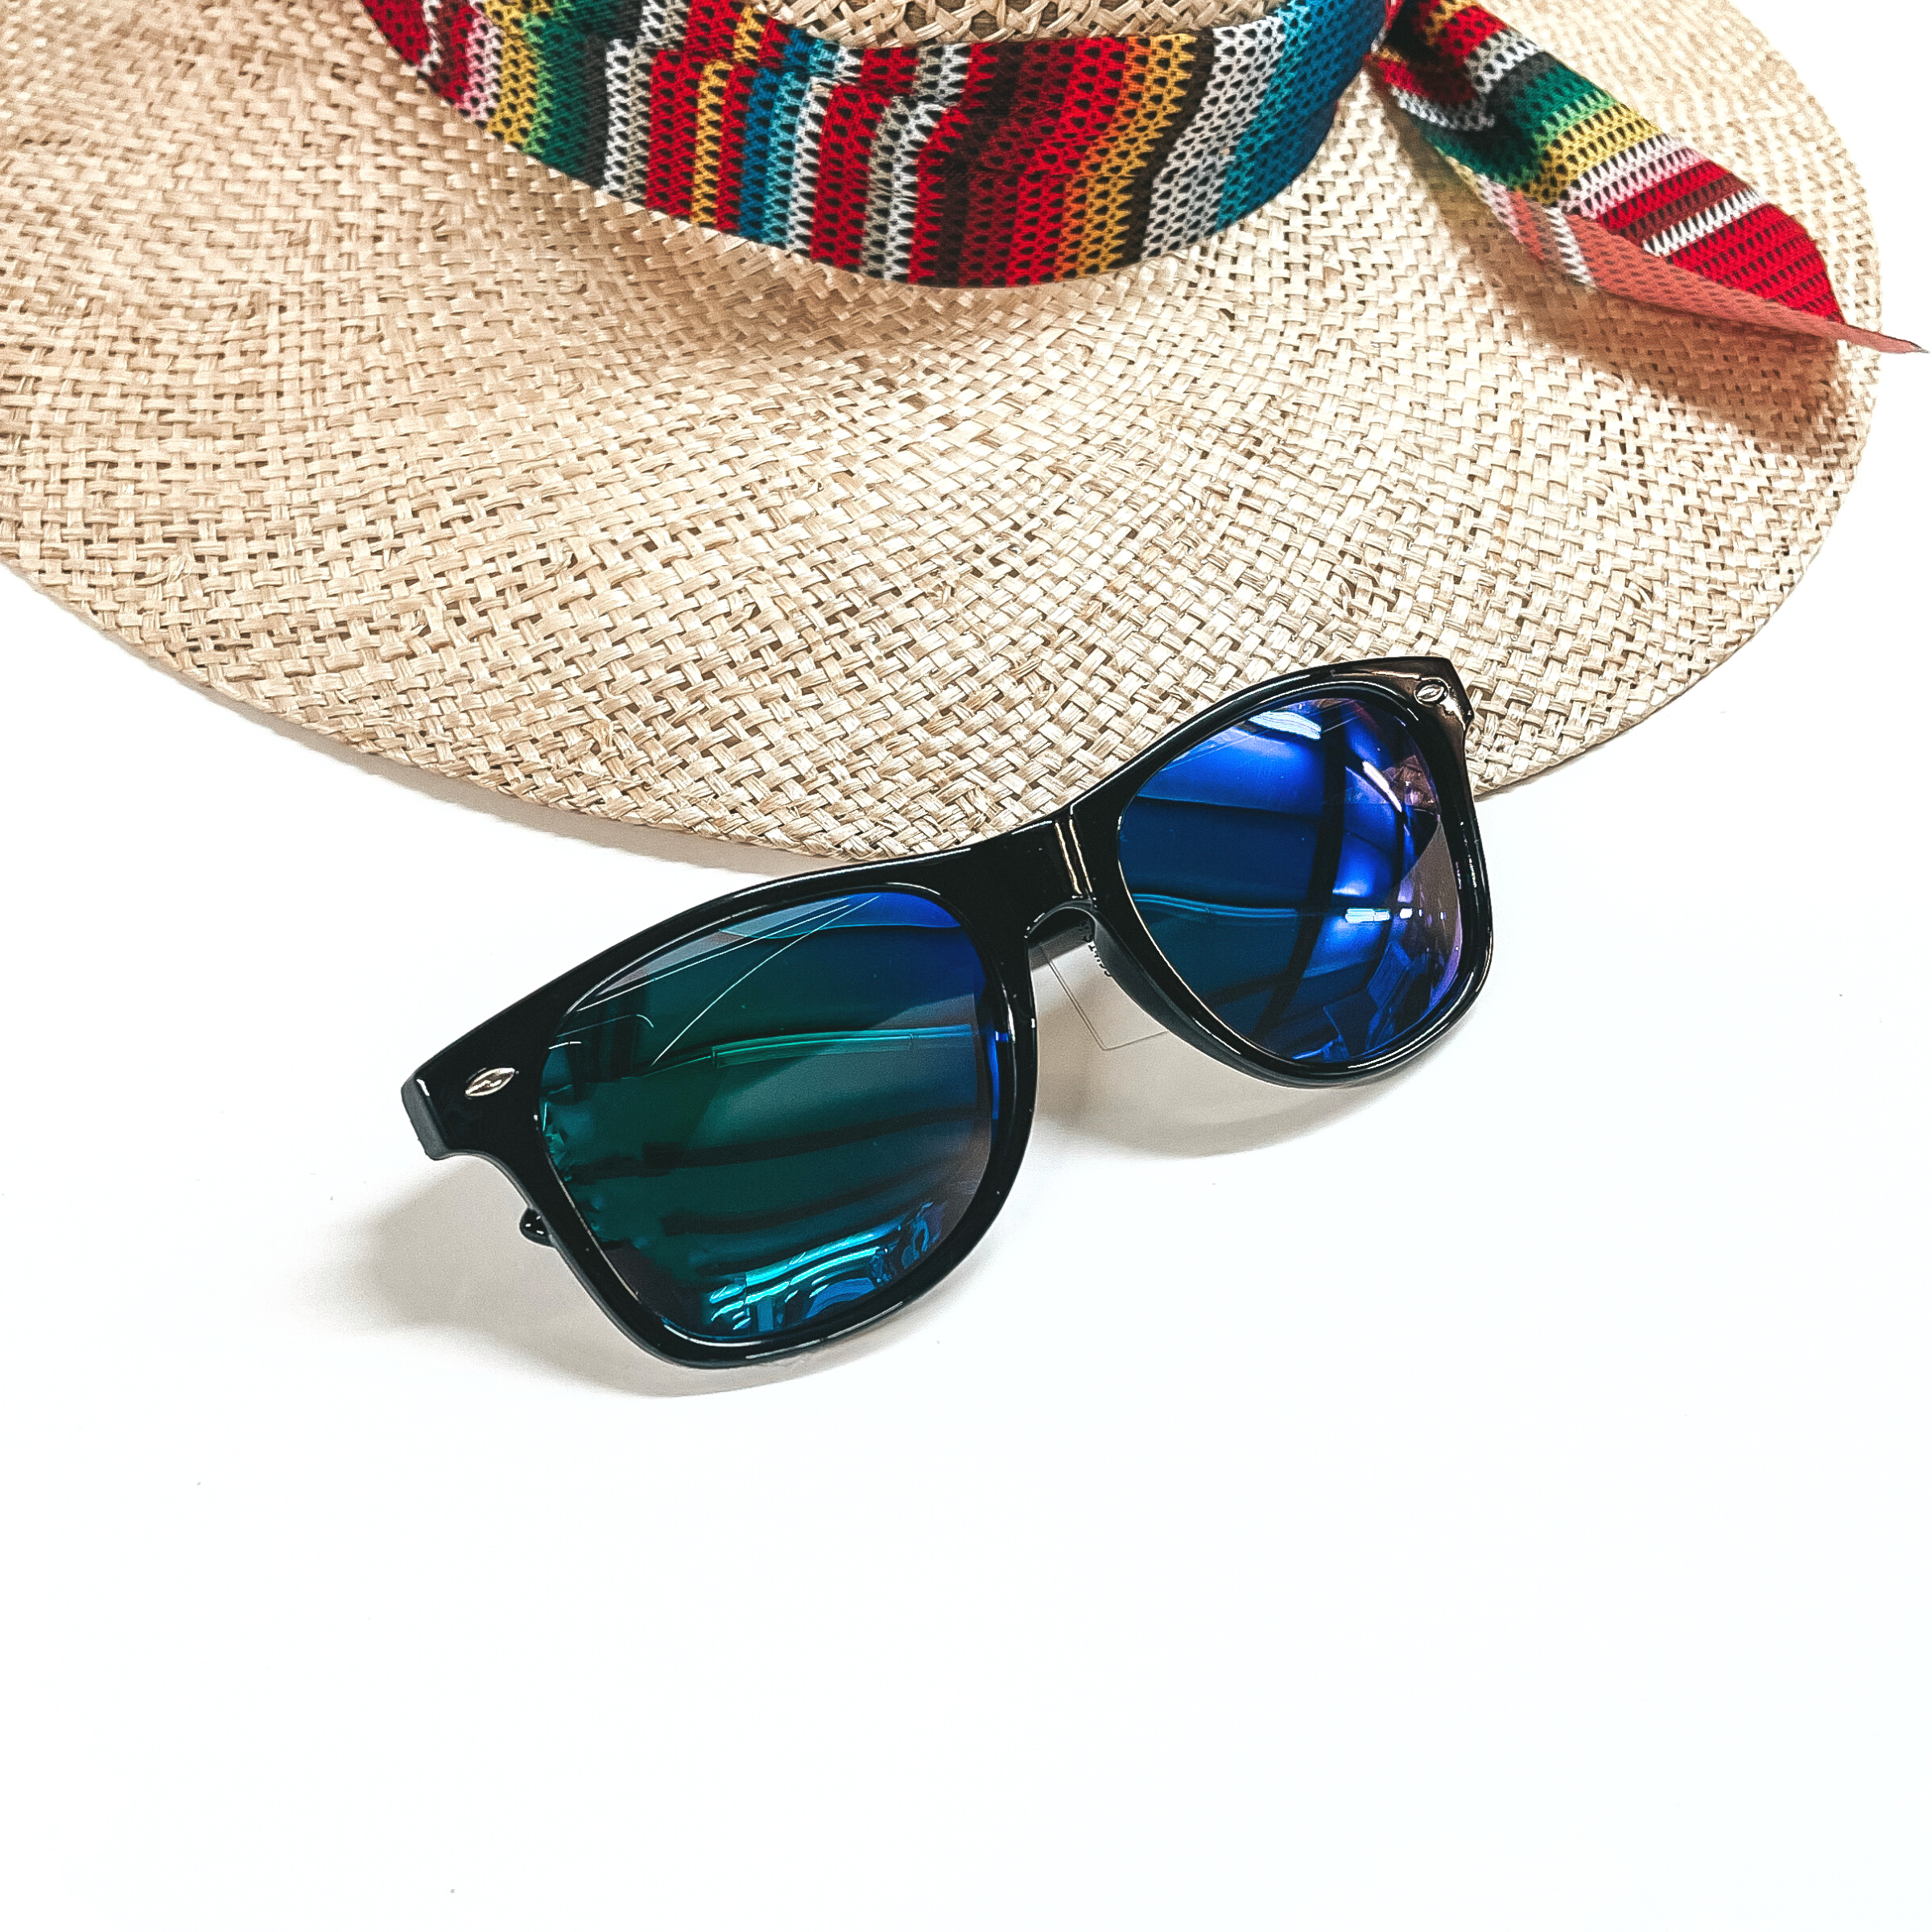 These are black framed sunglasses with blue/green lenses and silver detailing. These sunglasses are taken on a white background and a straw hat with a colorful hat band in the back as decor.